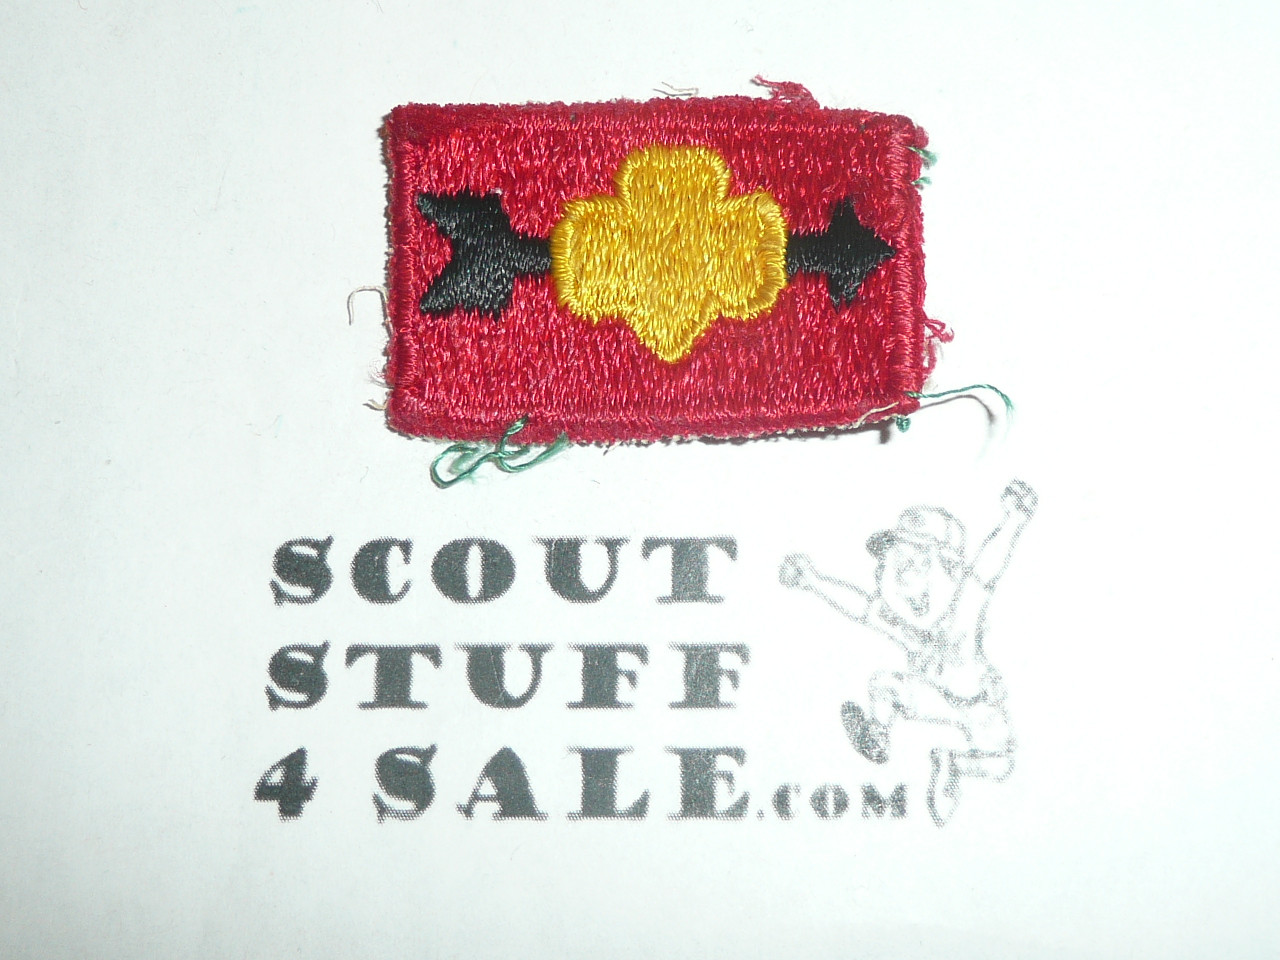 Girl Scout Trefoil with Arrow Patch, used